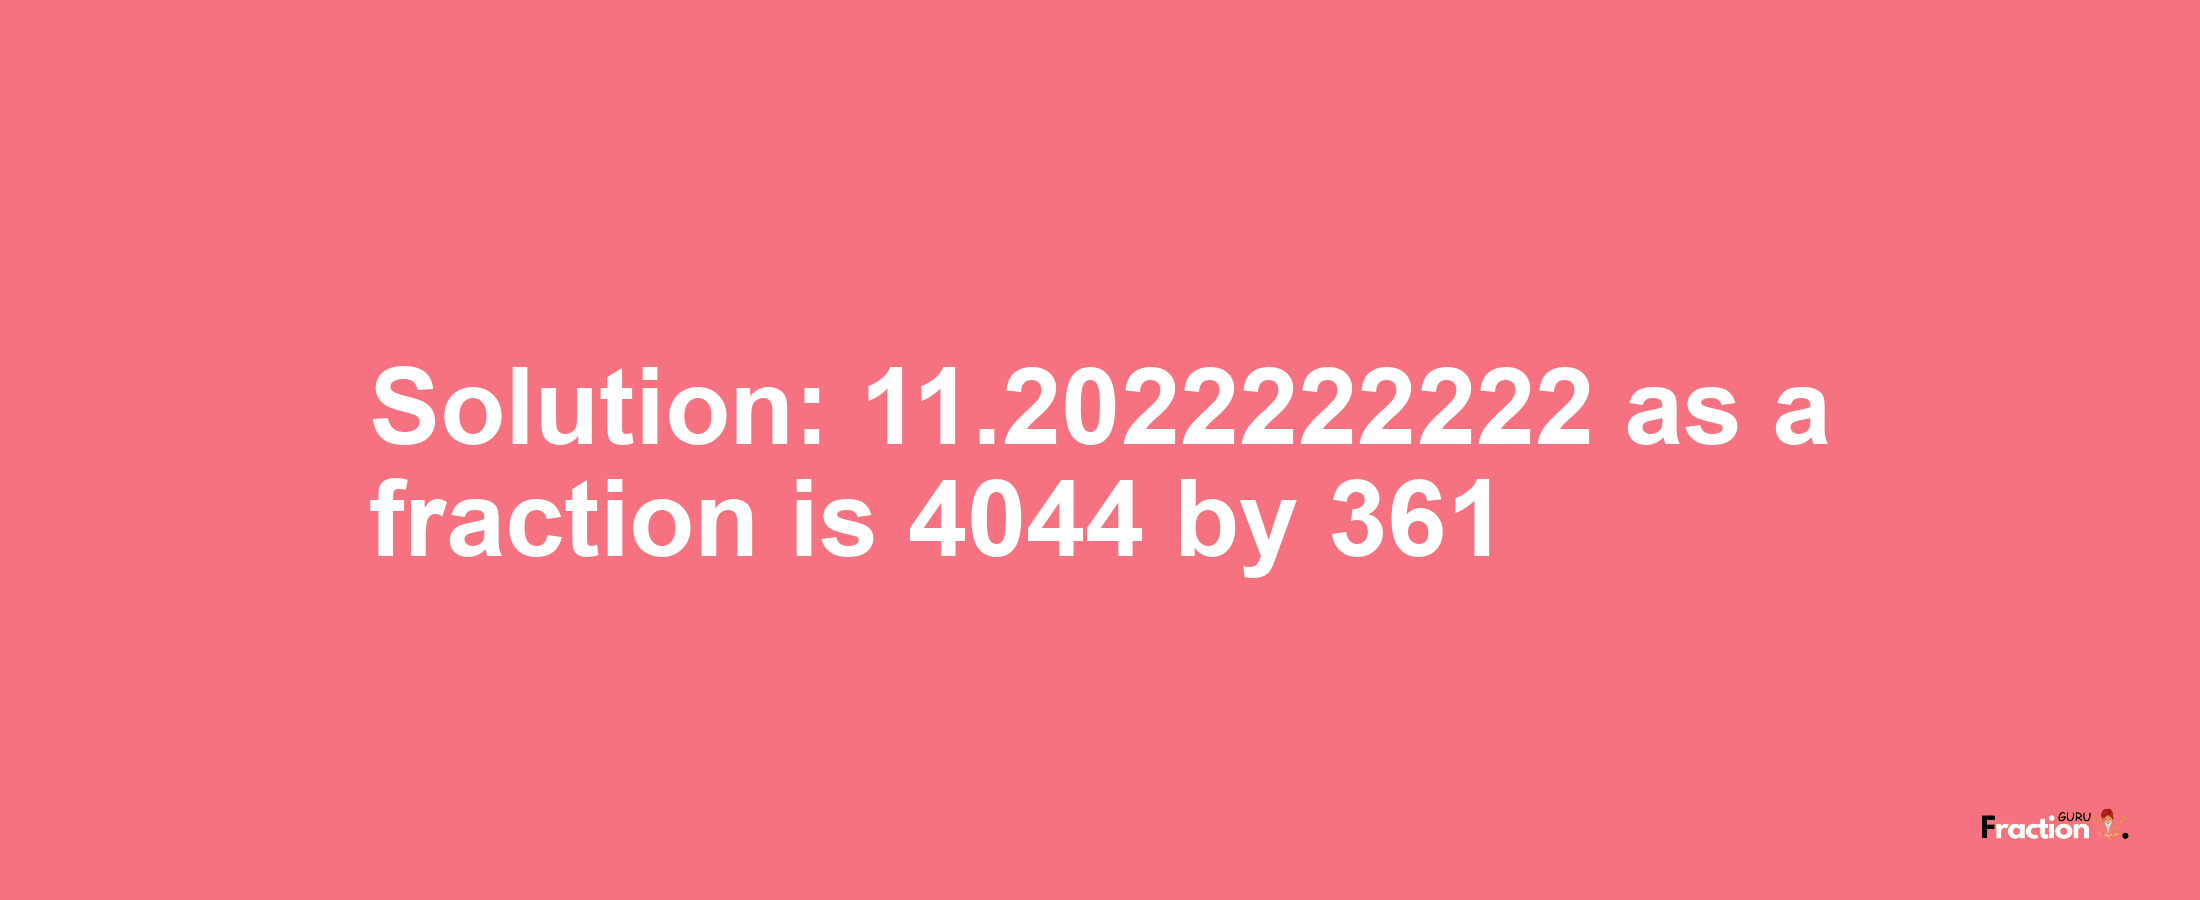 Solution:11.2022222222 as a fraction is 4044/361